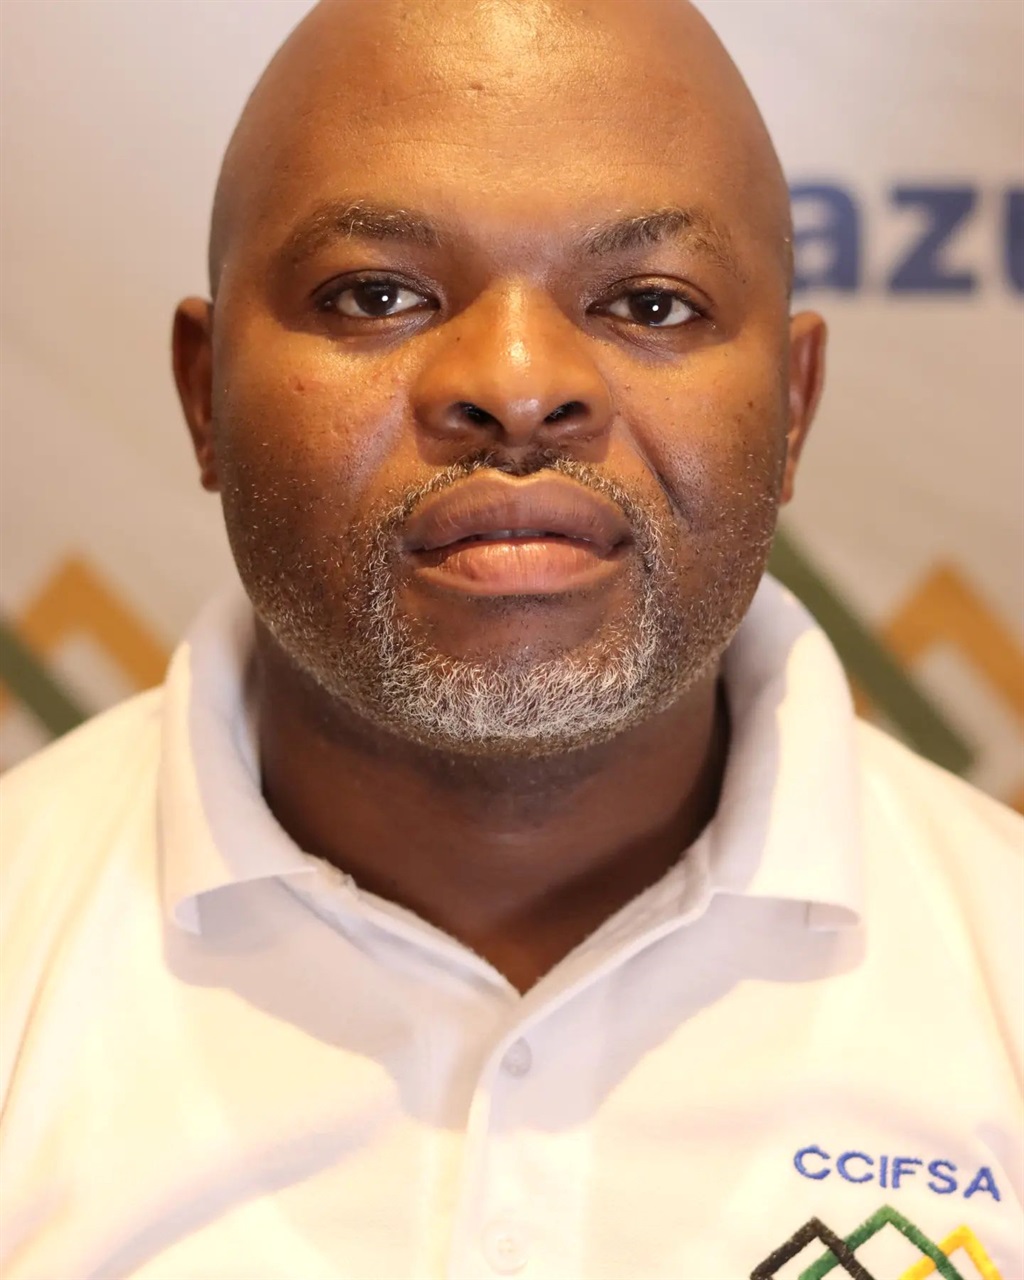 KZN CCIFSA chairman Tzozo Zulu said they are planning to talk to TV productions not shut doors on creatives from the province. 